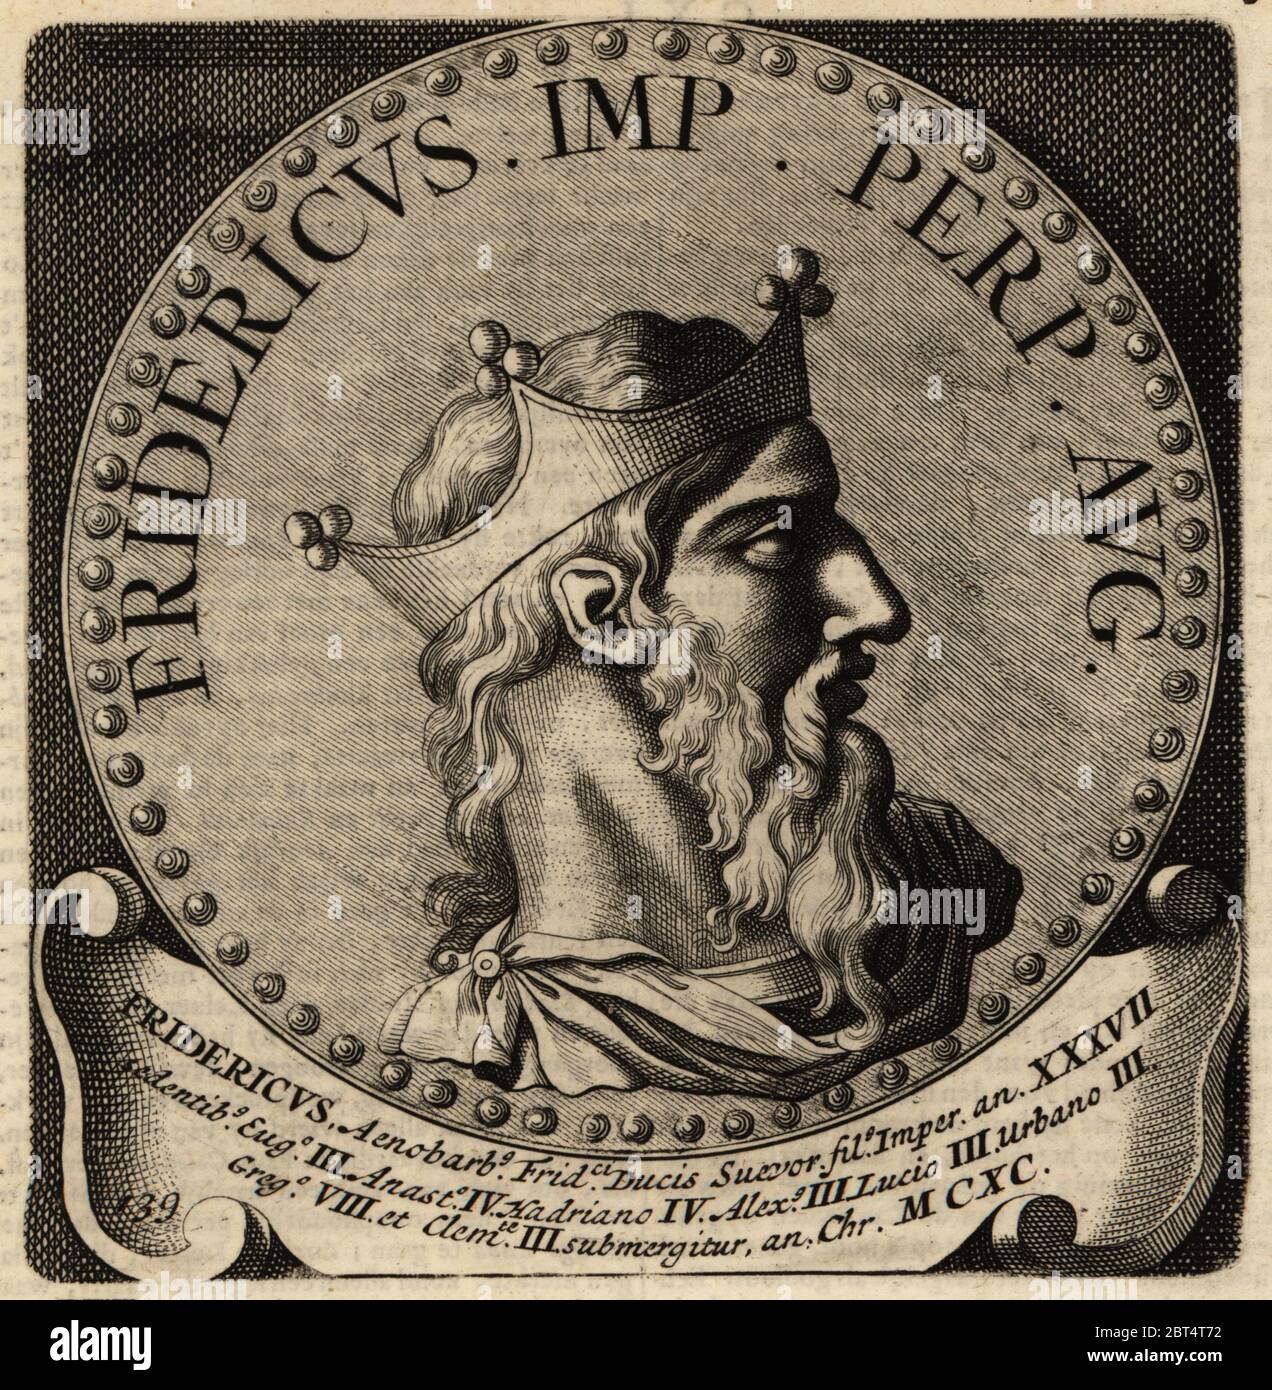 Holy Roman Emperor Frederick I, 1122-1190. Frederick Barbarossa, Red Beard, Fridericus Aenobarbus, King of Germany, King of Italy. Copperplate engraving from Abraham Bogaerts De Roomsche Monarchy, The Roman Monarchy, Francois Salma, Utrecht, 1697. Stock Photo